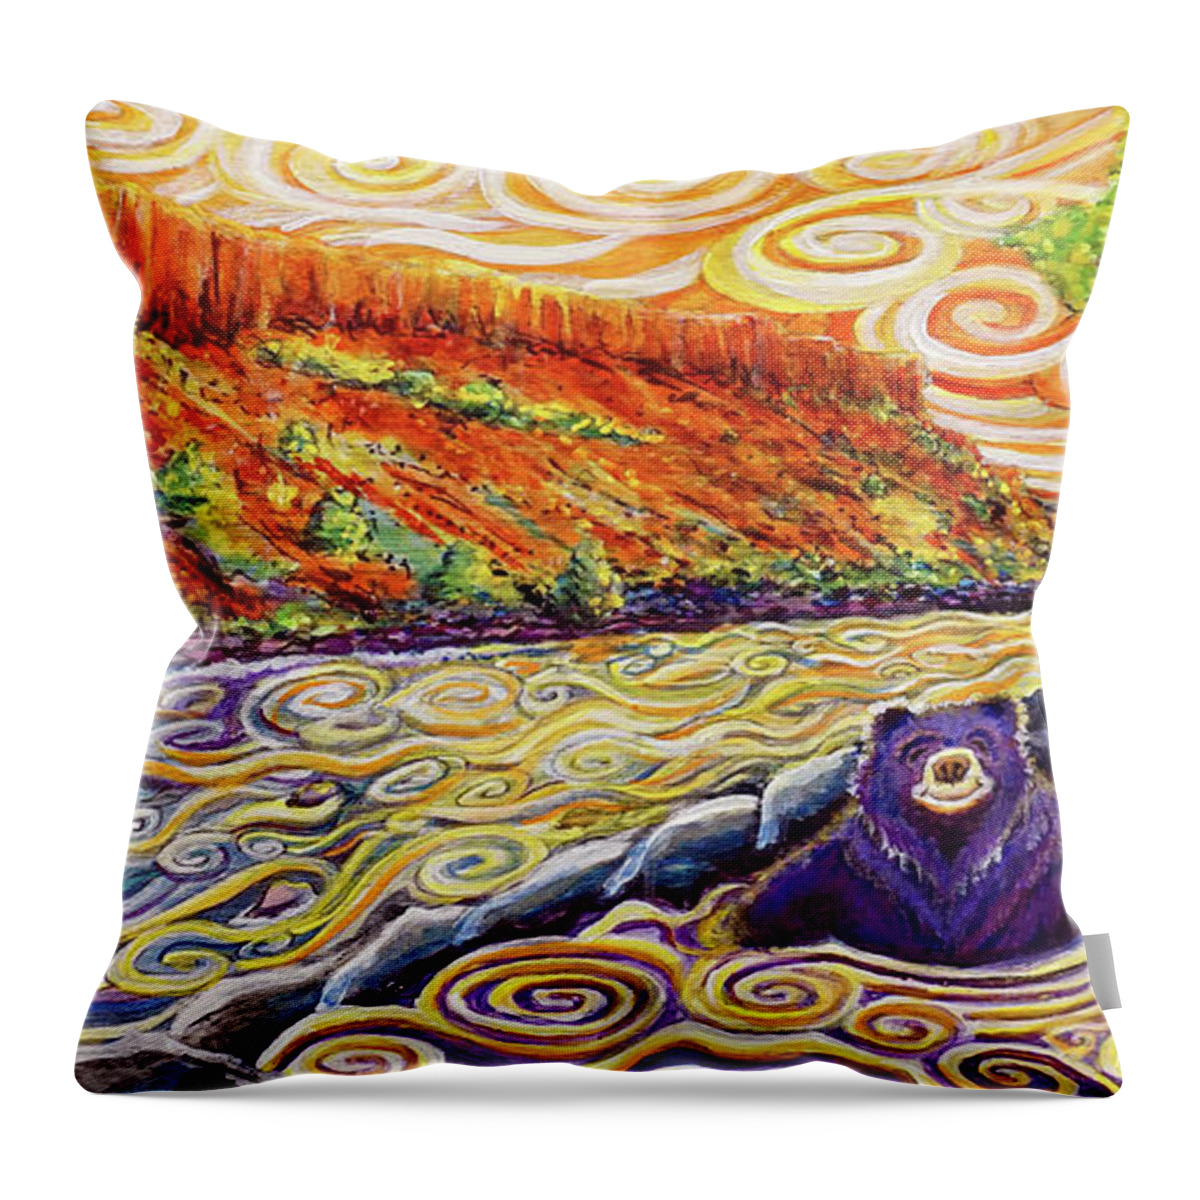 Bears Throw Pillow featuring the painting Hot Spring Bears by David Sockrider